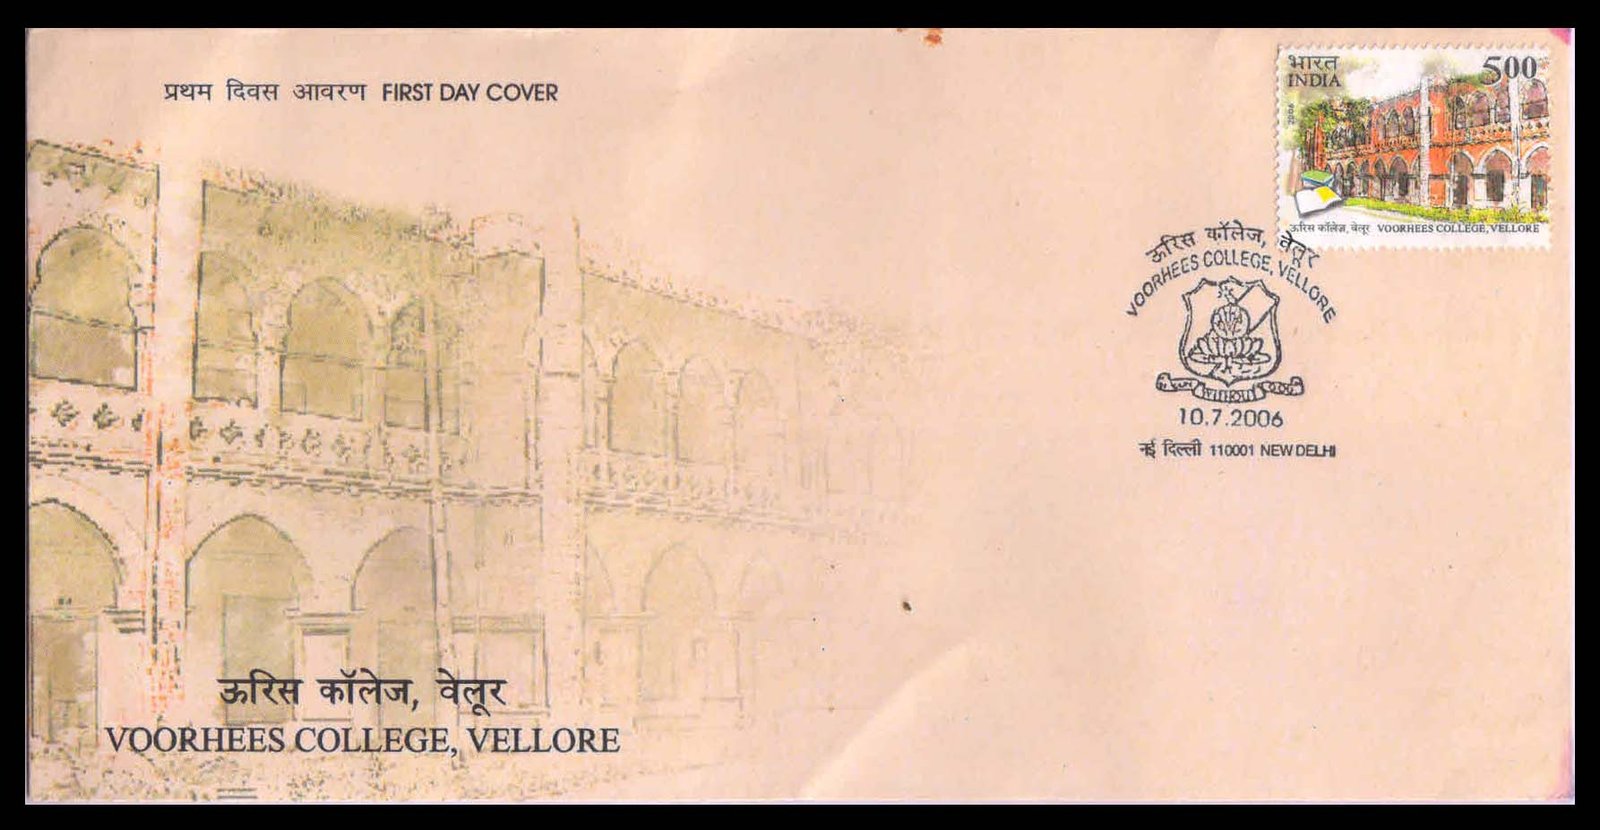 INDIA 10-7-2006, Voorhees College, Vellore, 1 Value on First Day Cover